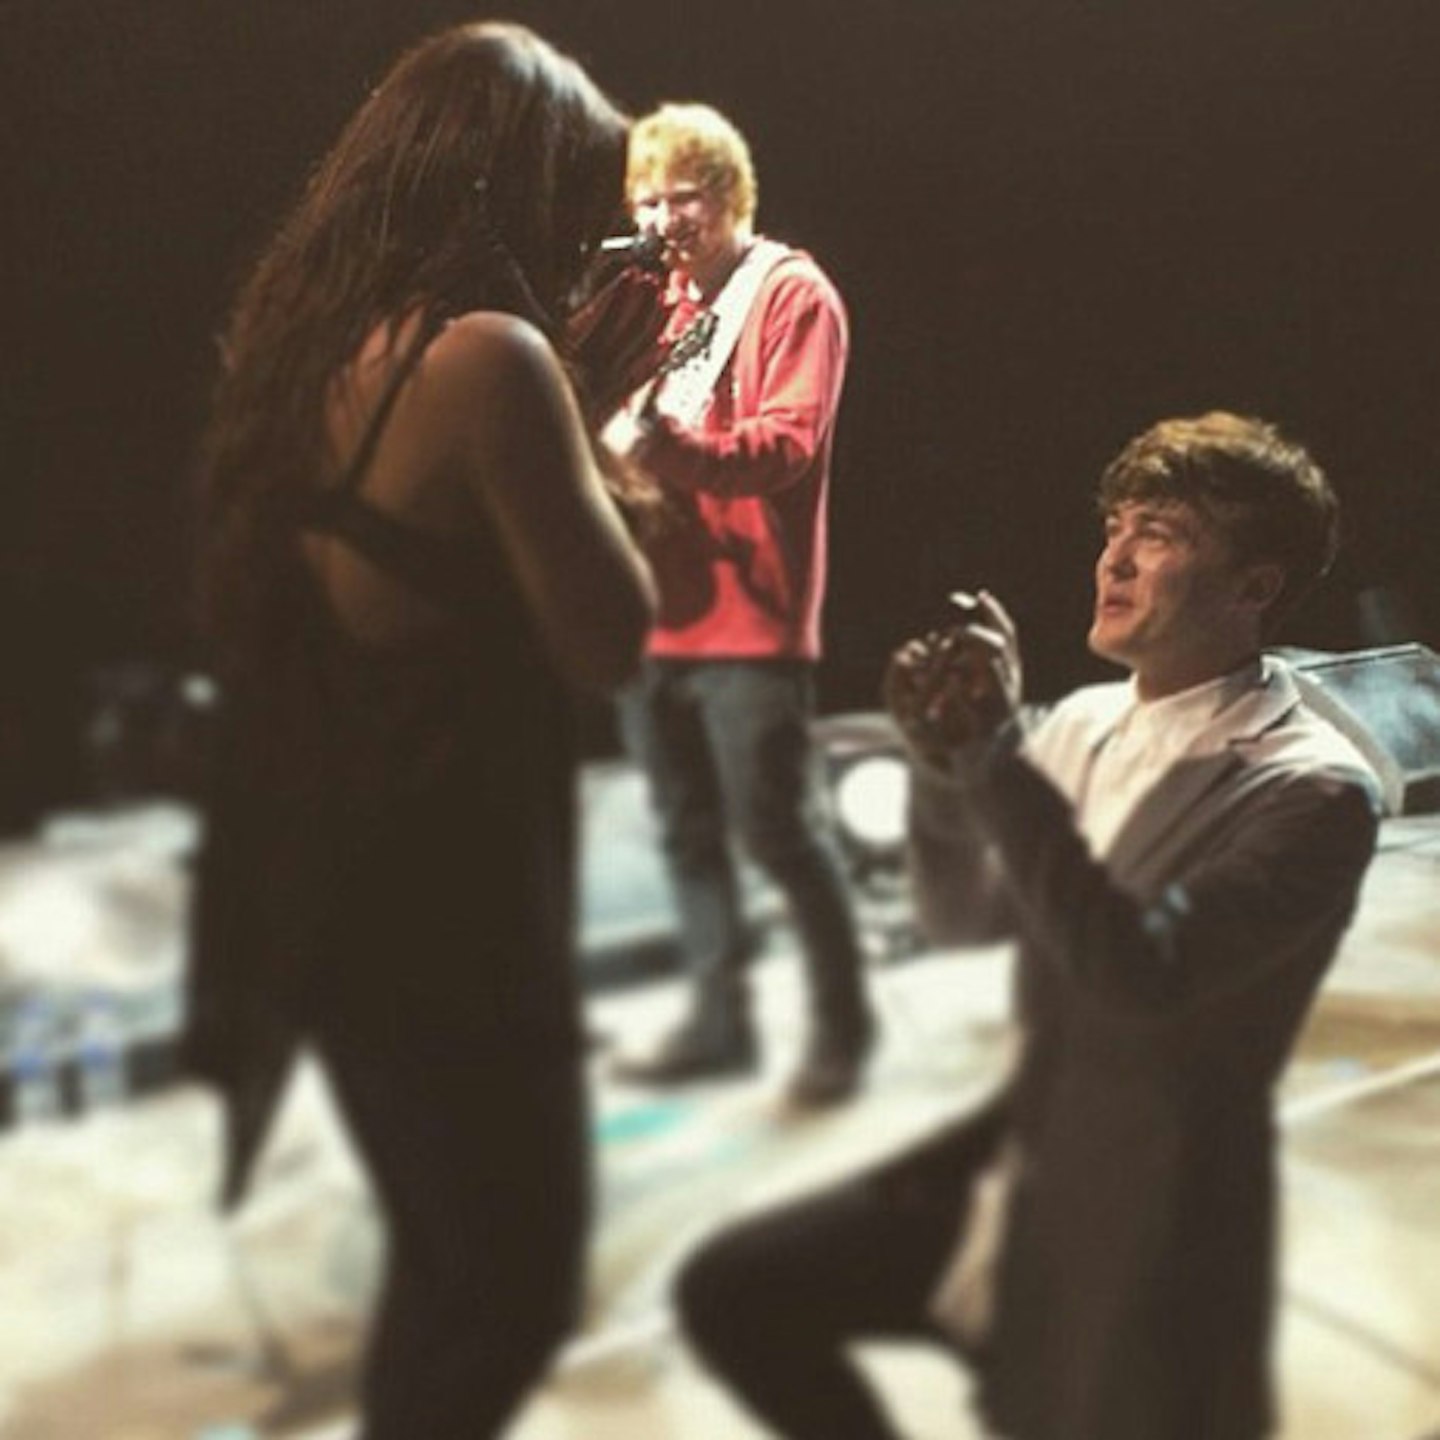 Ed sang Jesy and Jake's favourite song as he popped the question